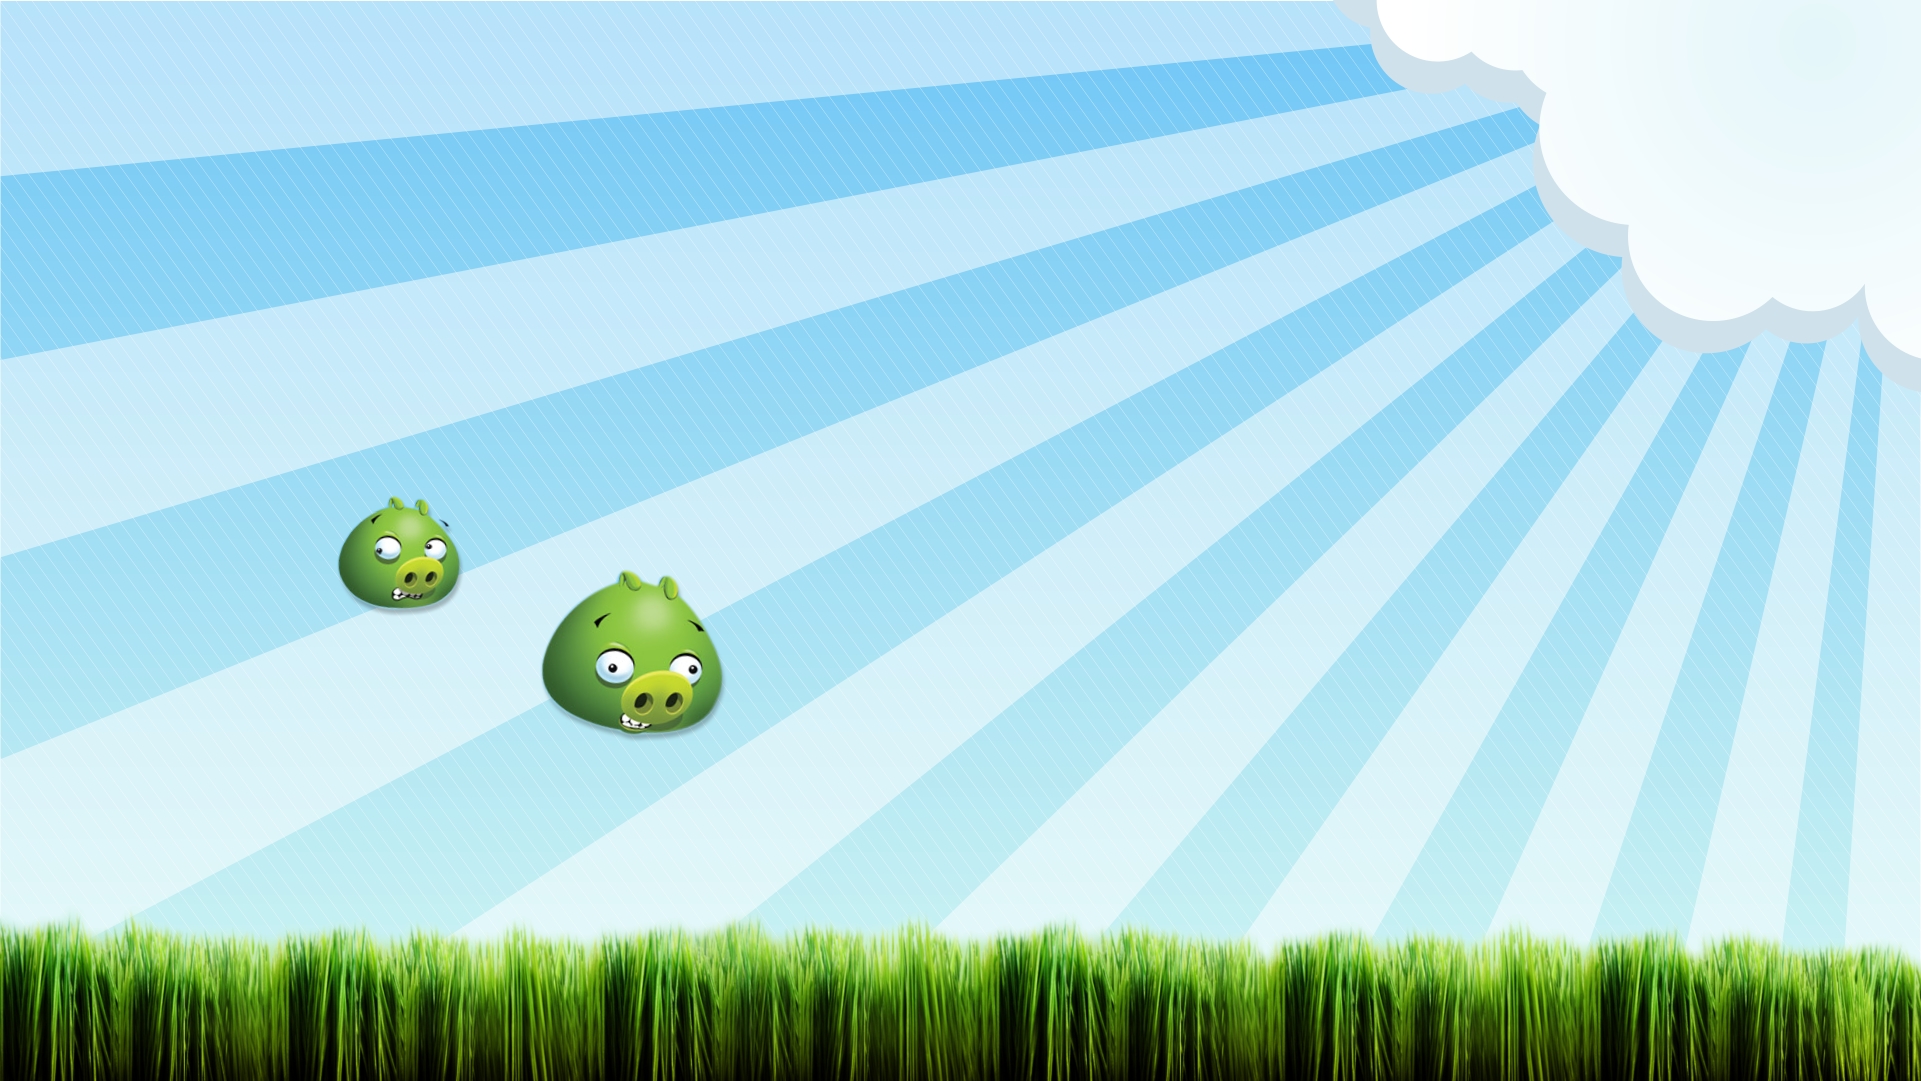    Angry Birds.  